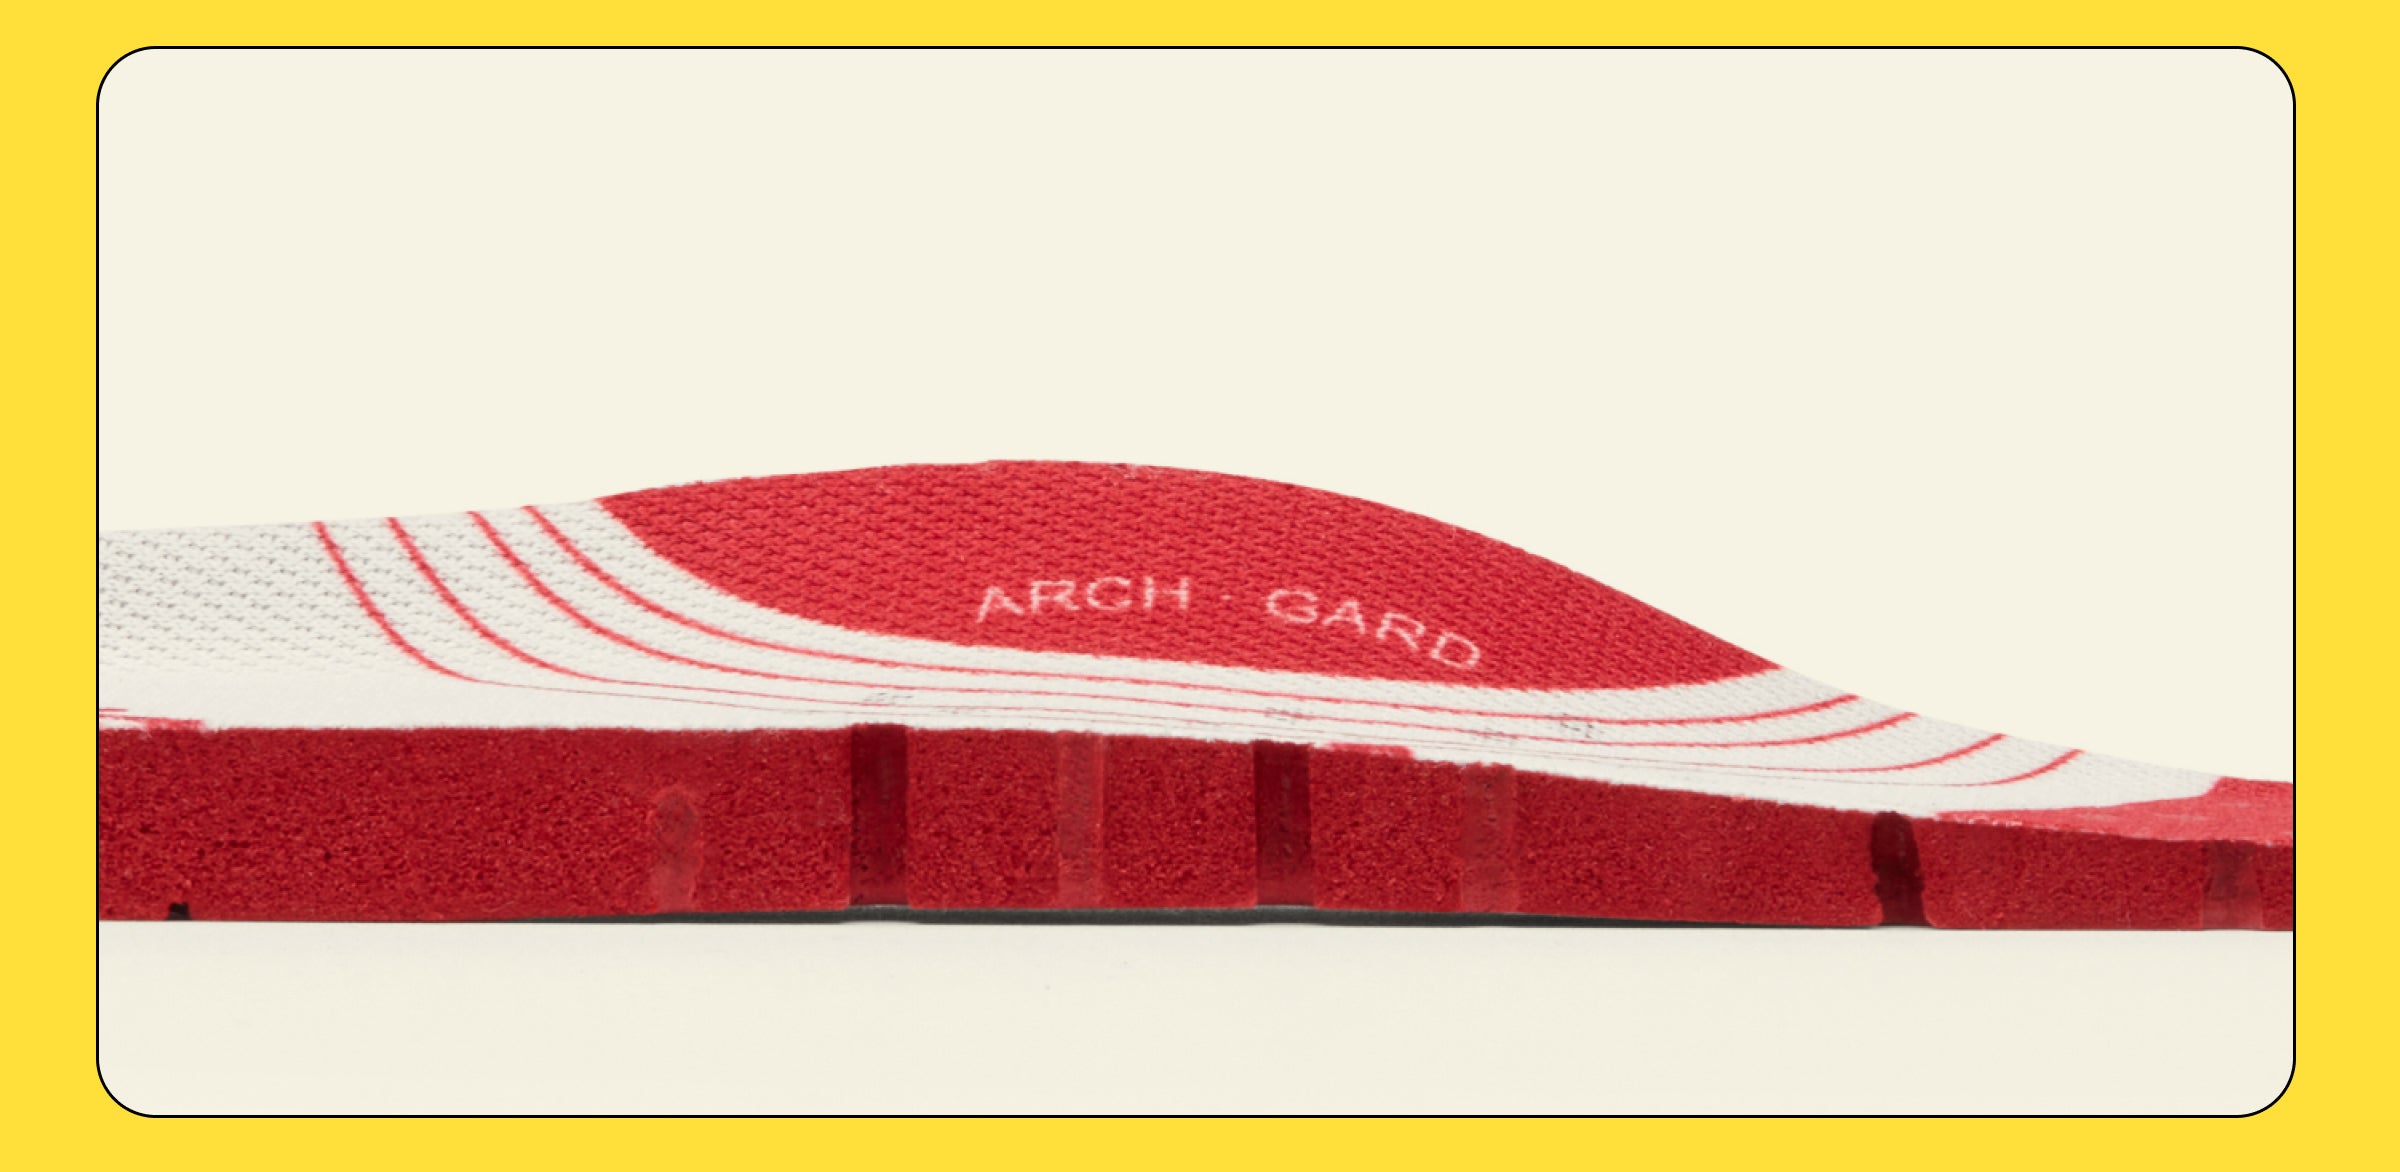 the arch gard insole